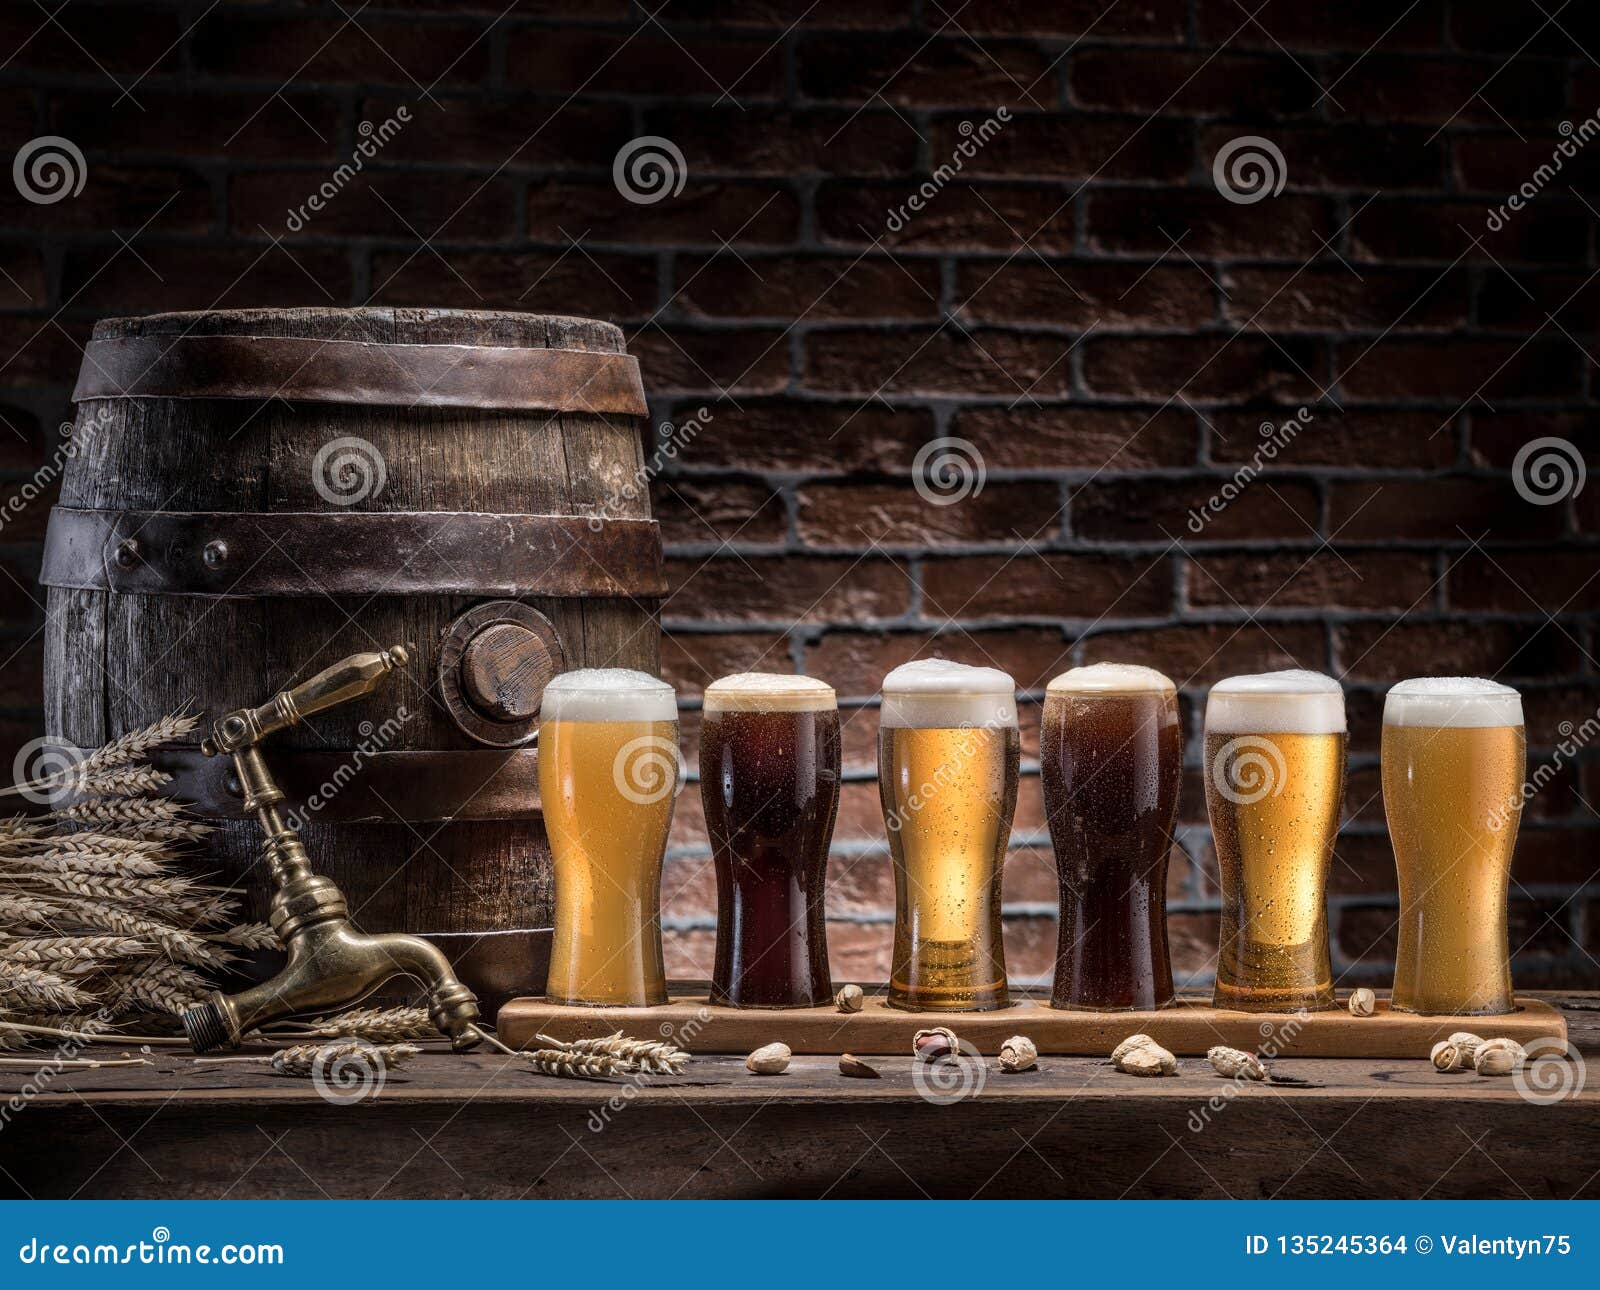 glasses of beer and ale barrel on the wooden table. craft brewery